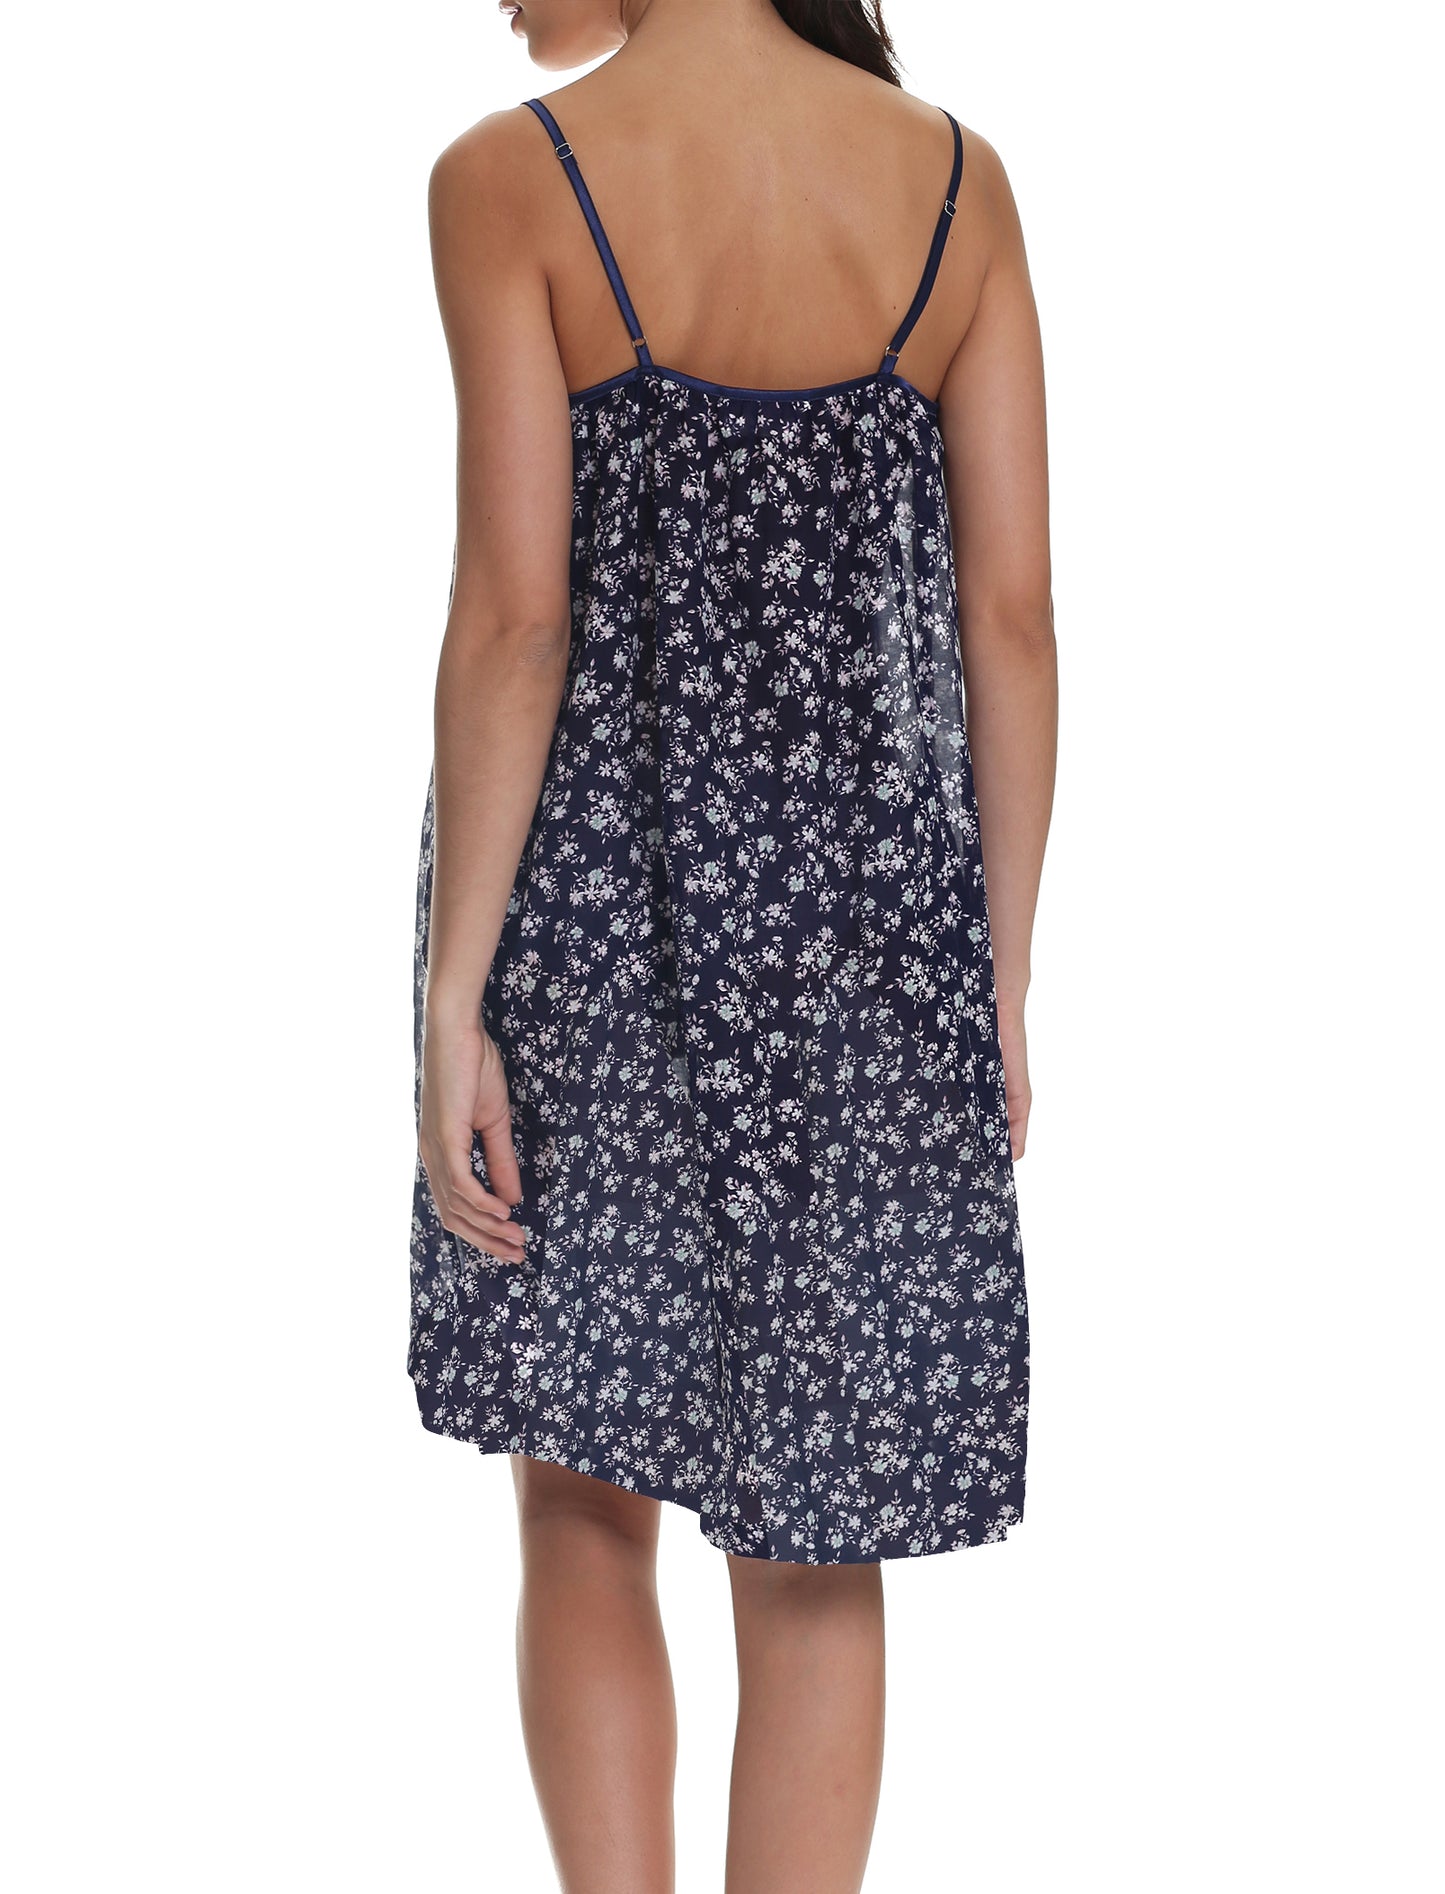 Potager Navy Cotton Strappy Nightgown